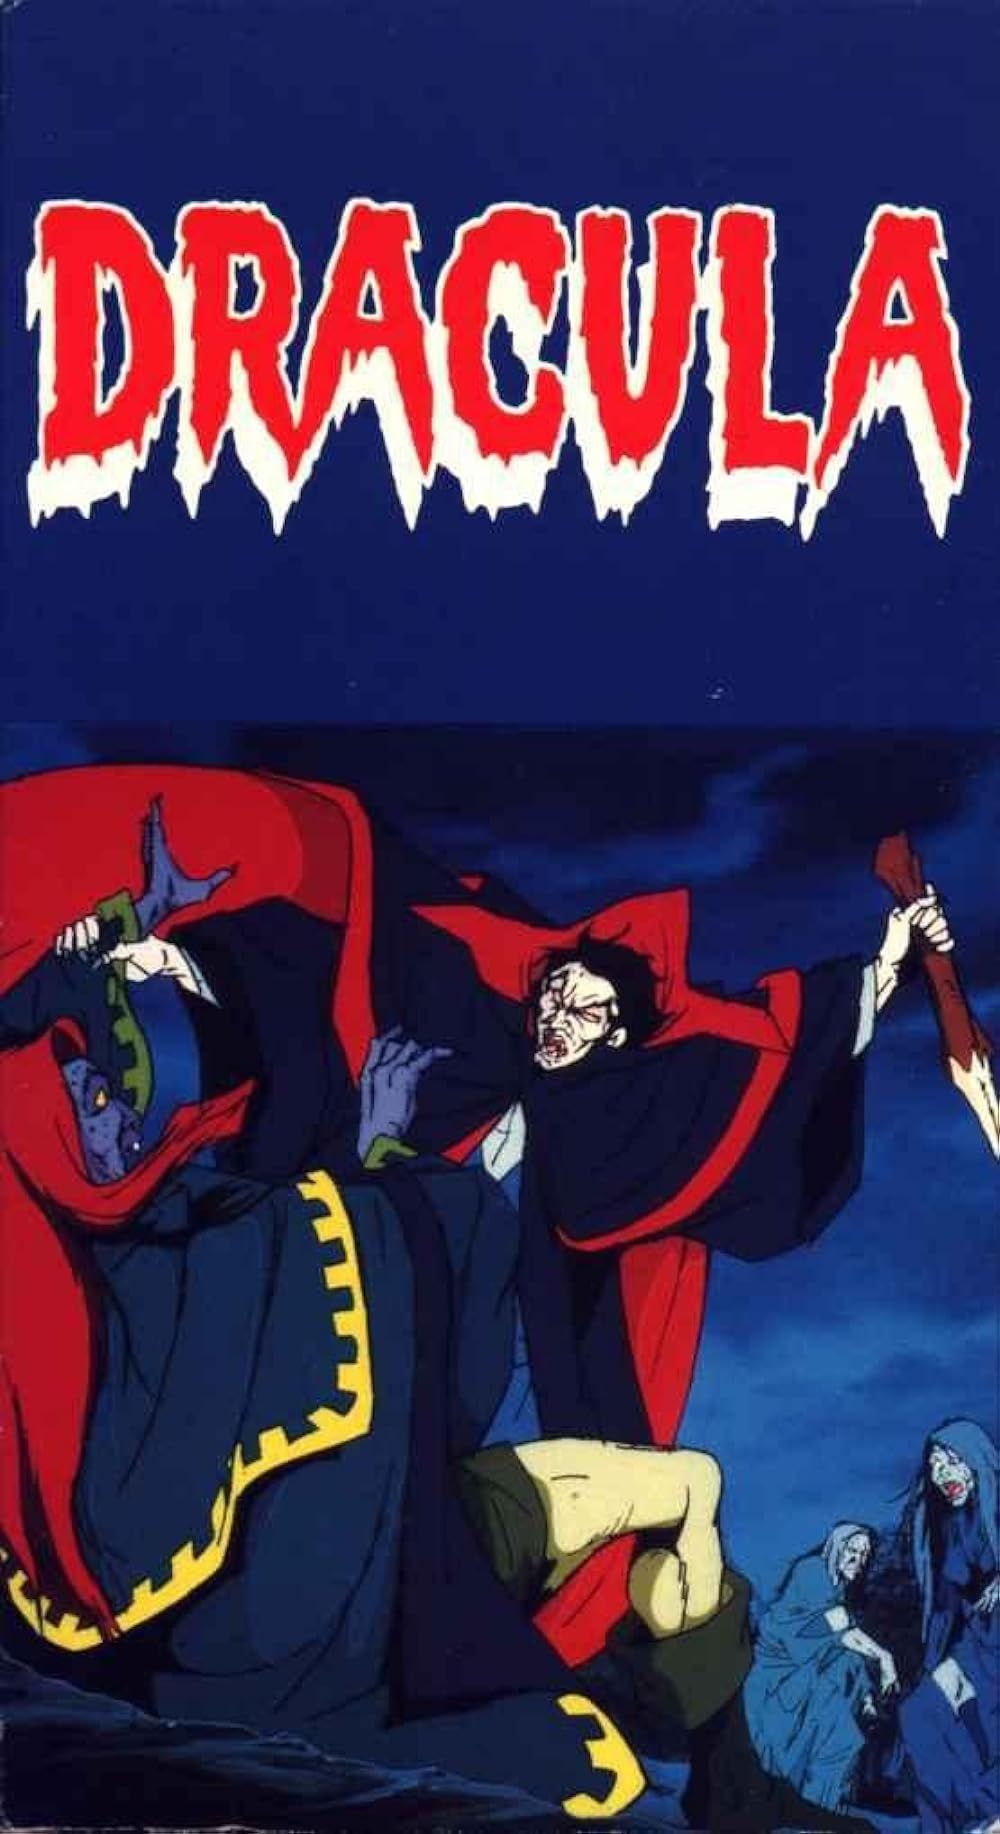 Dracula about to stab someone on the poster of Dracula: Sovereign of the Damned